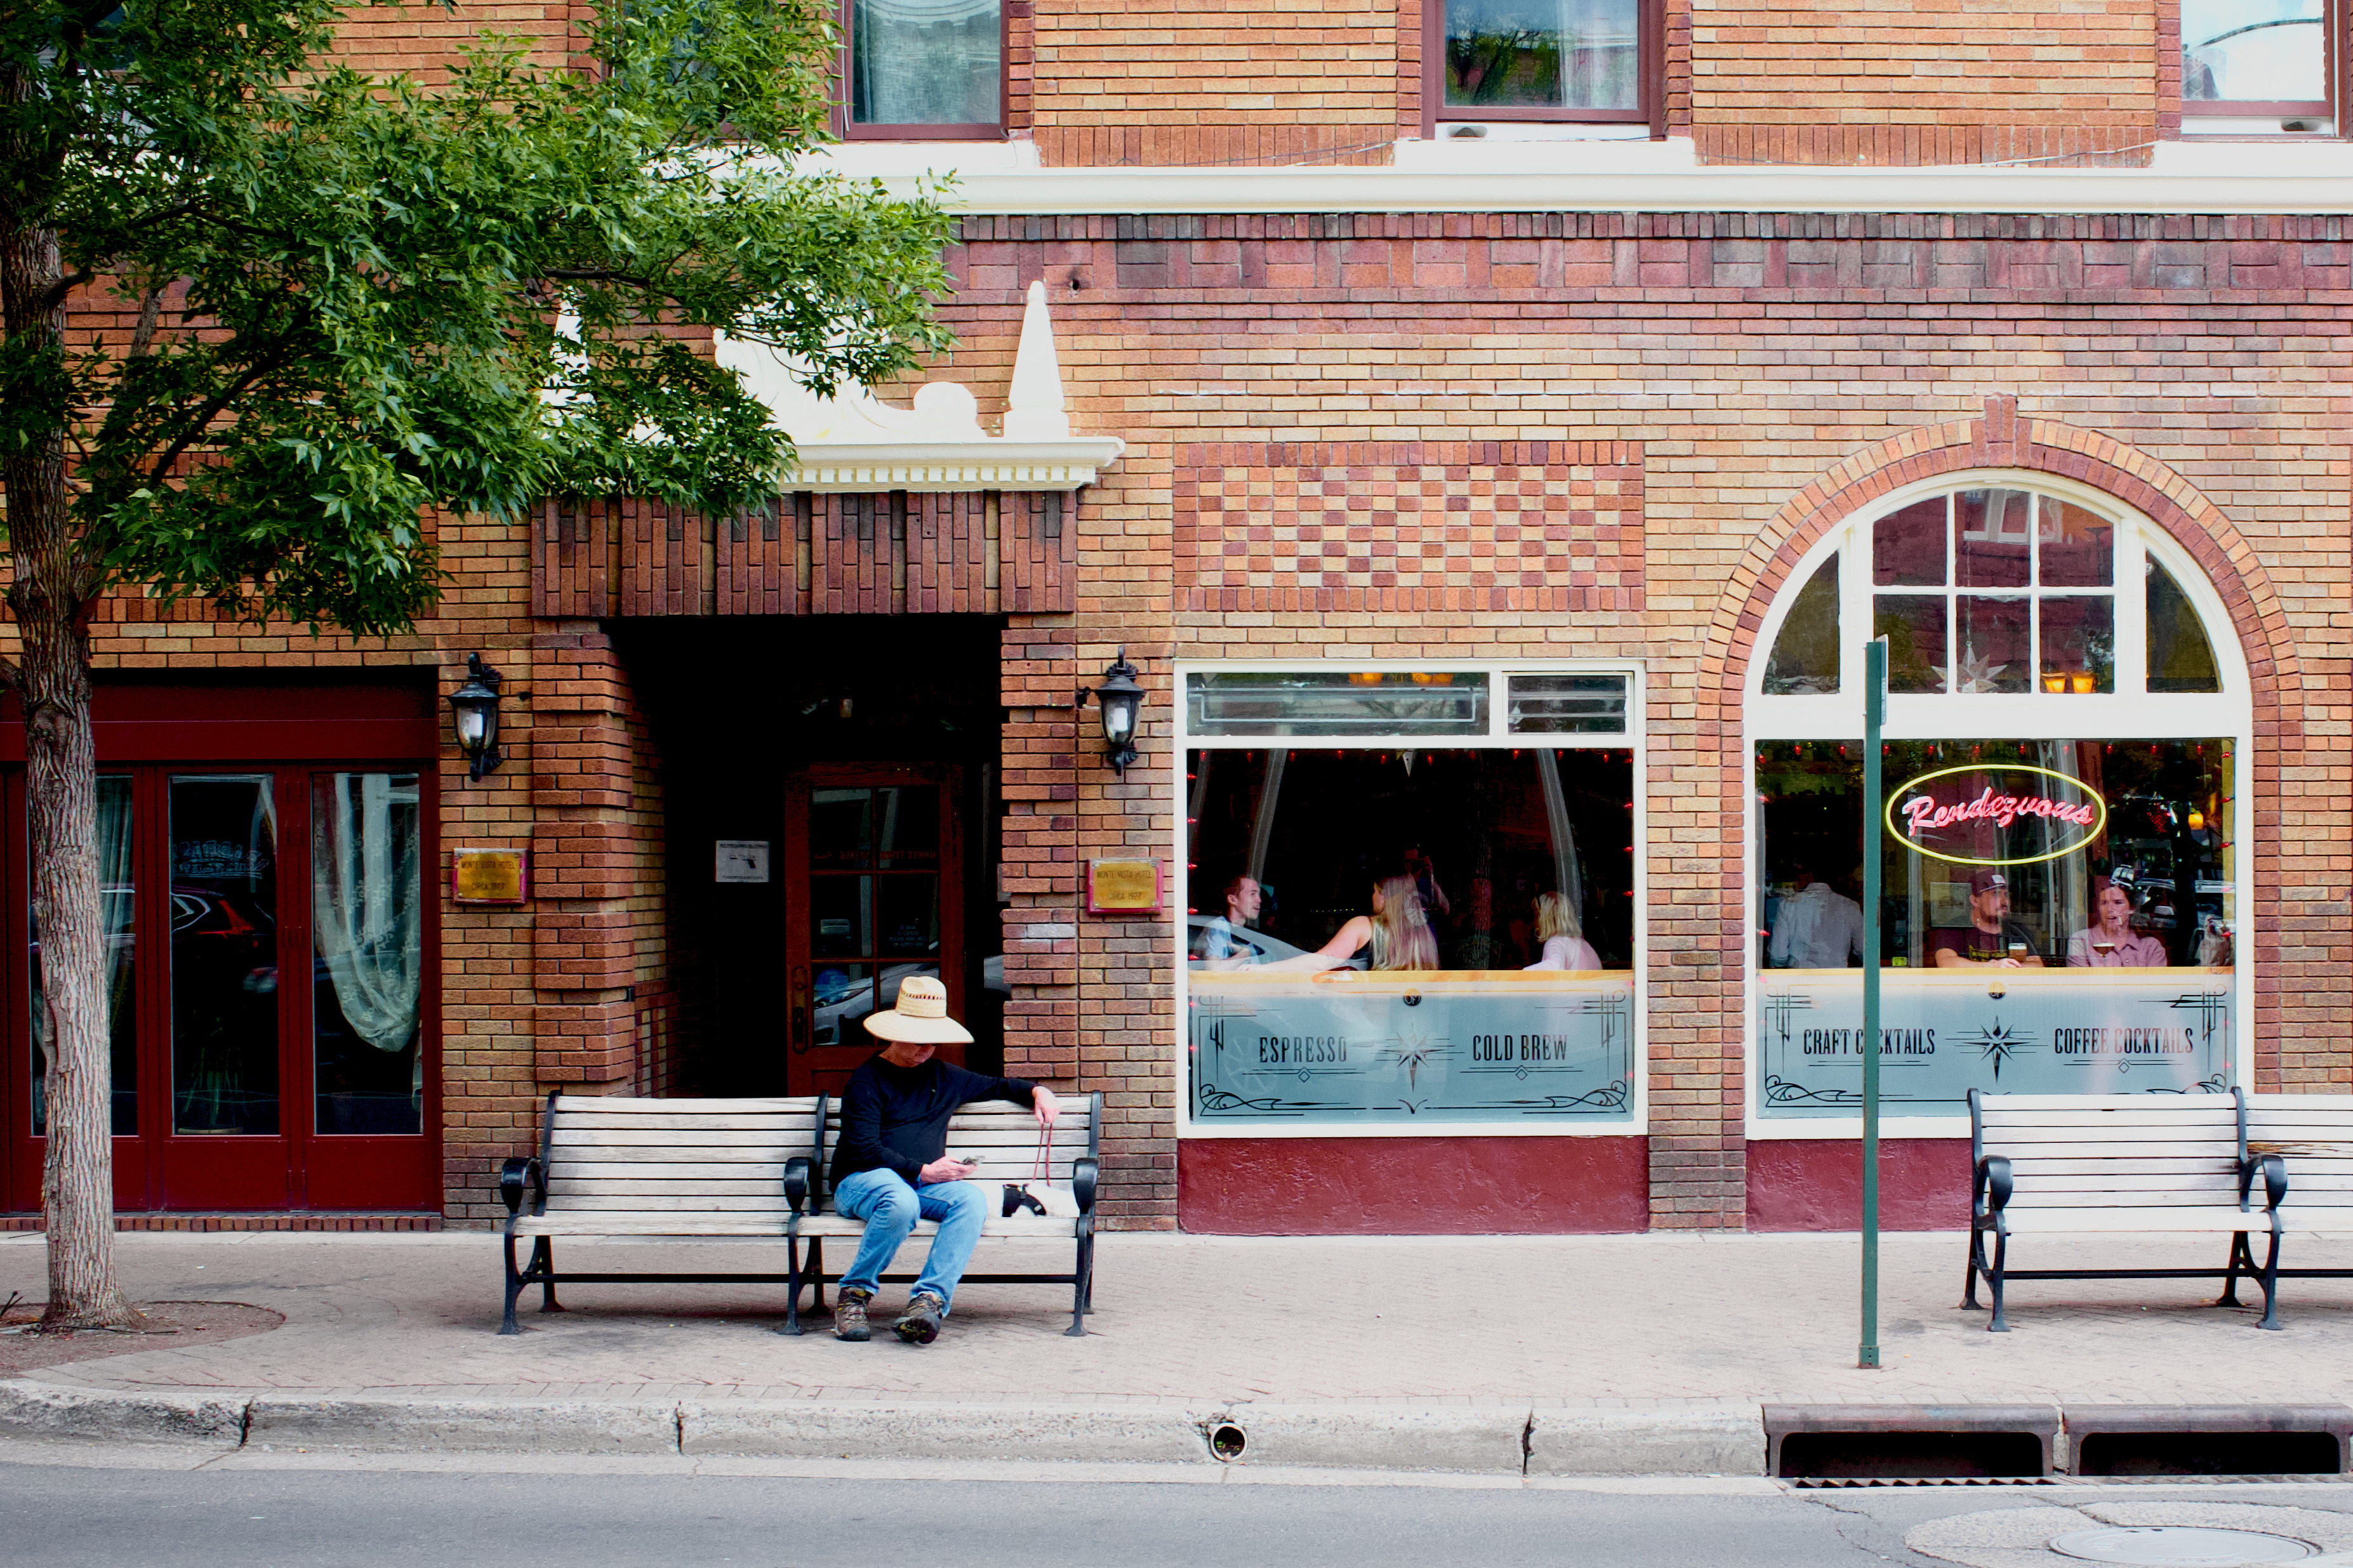 A person sits on a worn wooden bench outside a brick building, across the street from the photographer. Through the windows several people can be seen gathered, talking. There is a red neon sign in one window reading ‘Rendezvous’ in a cursive font. 